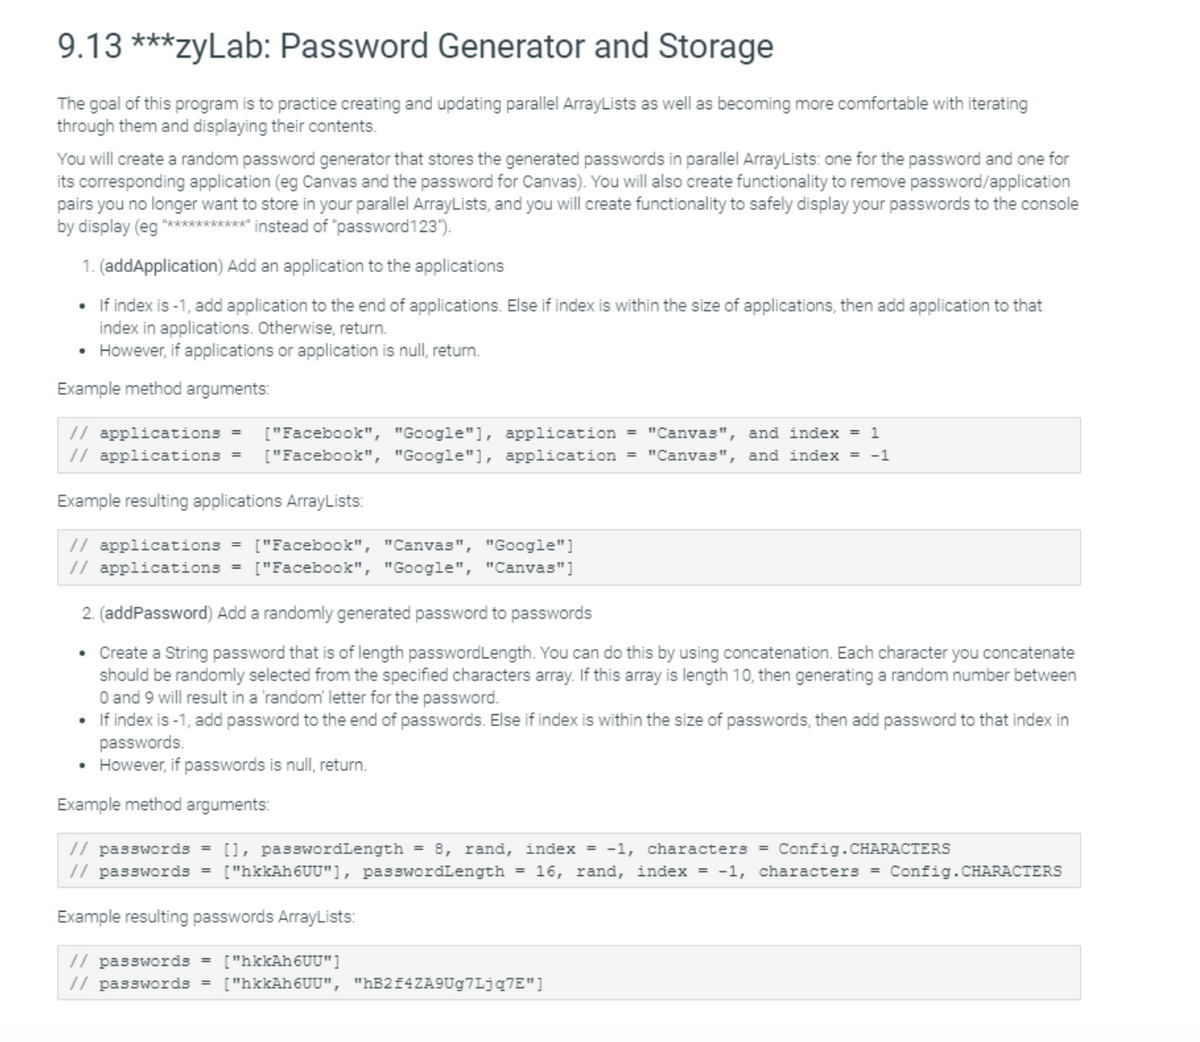 9.13 ***zyLab: Password Generator and Storage
The goal of this program is to practice creating and updating parallel ArrayLists as well as becoming more comfortable with iterating
through them and displaying their contents.
You will create a random password generator that stores the generated passwords in parallel ArrayLists: one for the password and one for
its corresponding application (eg Canvas and the password for Canvas). You will also create functionality to remove password/application
pairs you no longer want to store in your parallel ArrayLists, and you will create functionality to safely display your passwords to the console
by display (eg "***********" instead of "password123").
1. (addApplication) Add an application to the applications
• If index is -1, add application to the end of applications. Else if index is within the size of applications, then add application to that
index in applications. Otherwise, return.
• However, if applications or application is null, return.
Example method arguments:
["Facebook", "Google"], application = "Canvas", and index = 1
// applications =
// applications =
["Facebook", "Google"], application = "Canvas", and index = -1
Example resulting applications ArrayLists:
// applications = ["Facebook", "Canvas", "Google"]
// applications = ["Facebook", "Google", "Canvas"]
2. (addPassword) Add a randomly generated password to passwords
• Create a String password that is of length passwordLength. You can do this by using concatenation. Each character you concatenate
should be randomly selected from the specified characters array. If this array is length 10, then generating a random number between
O and 9 will result in a 'random' letter for the password.
• If index is -1, add password to the end of passwords. Else if index is within the size of passwords, then add password to that index in
passwords.
• However, if passwords is null, return.
Example method arguments:
// passwords = [], passwordLength = 8, rand, index = -1, characters = Config.CHARACTERS
// passwords = ["hkkAh6UU"], passwordLength = 16, rand, index = -1, characters = Config.CHARACTERS
Example resulting passwords ArrayLists:
// passwords =
// passwords = ["hkkAh6UU", "hB2f4ZA9Ug7Ljq7E"]
["hkkAh6UU"]
